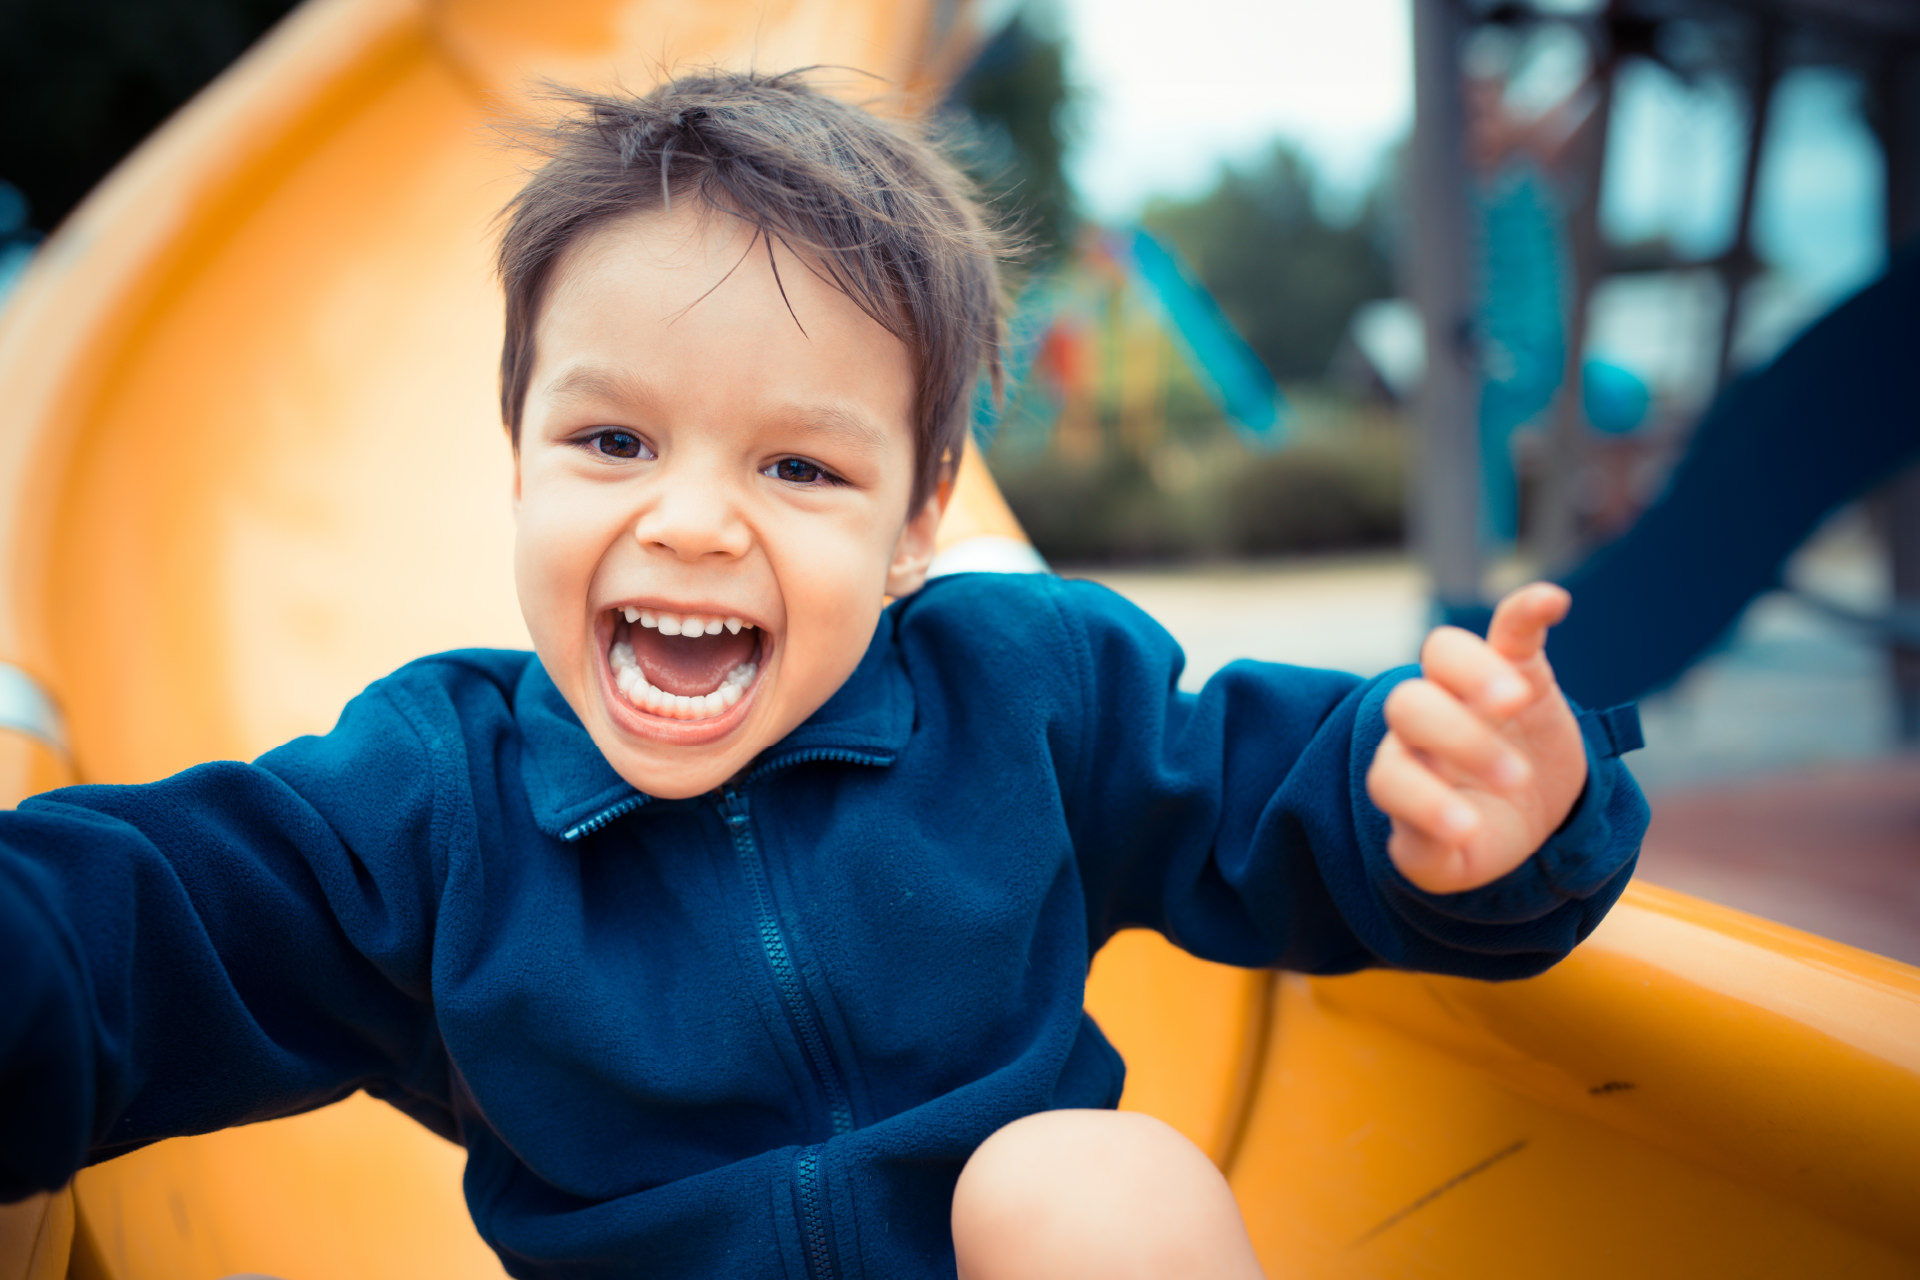 Young child happily playing on a slide.